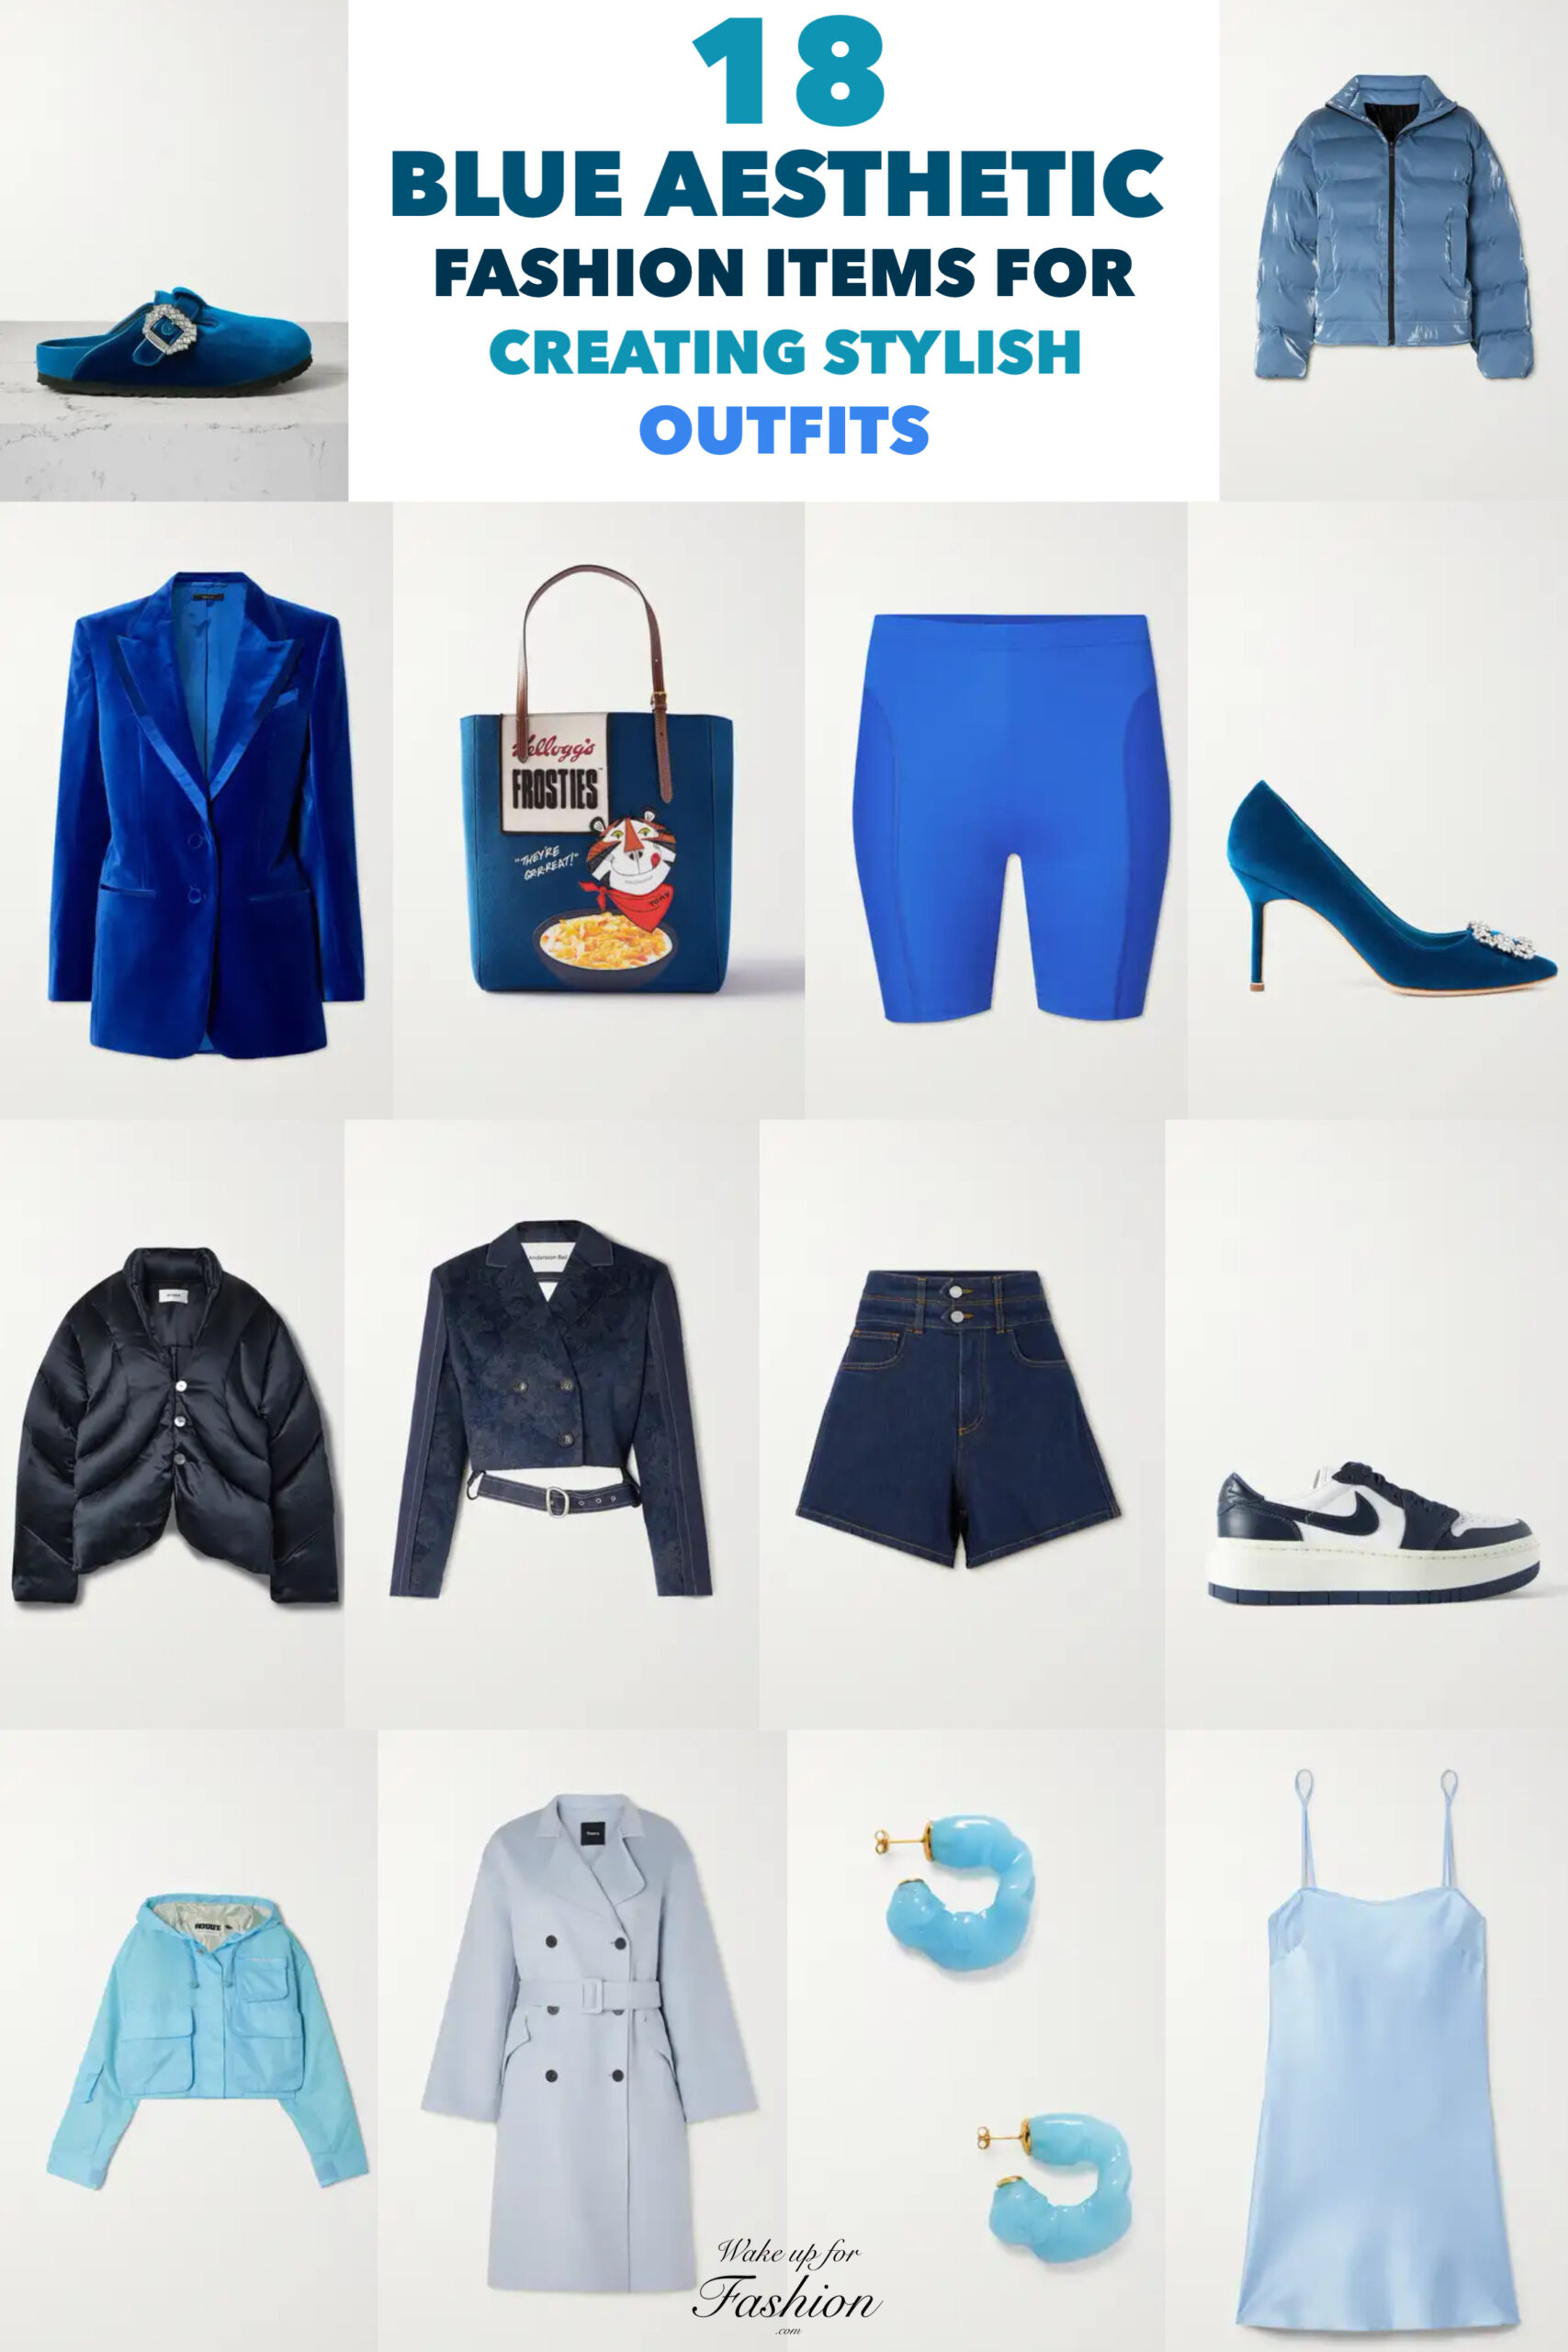 Blue aesthetic fashion for women